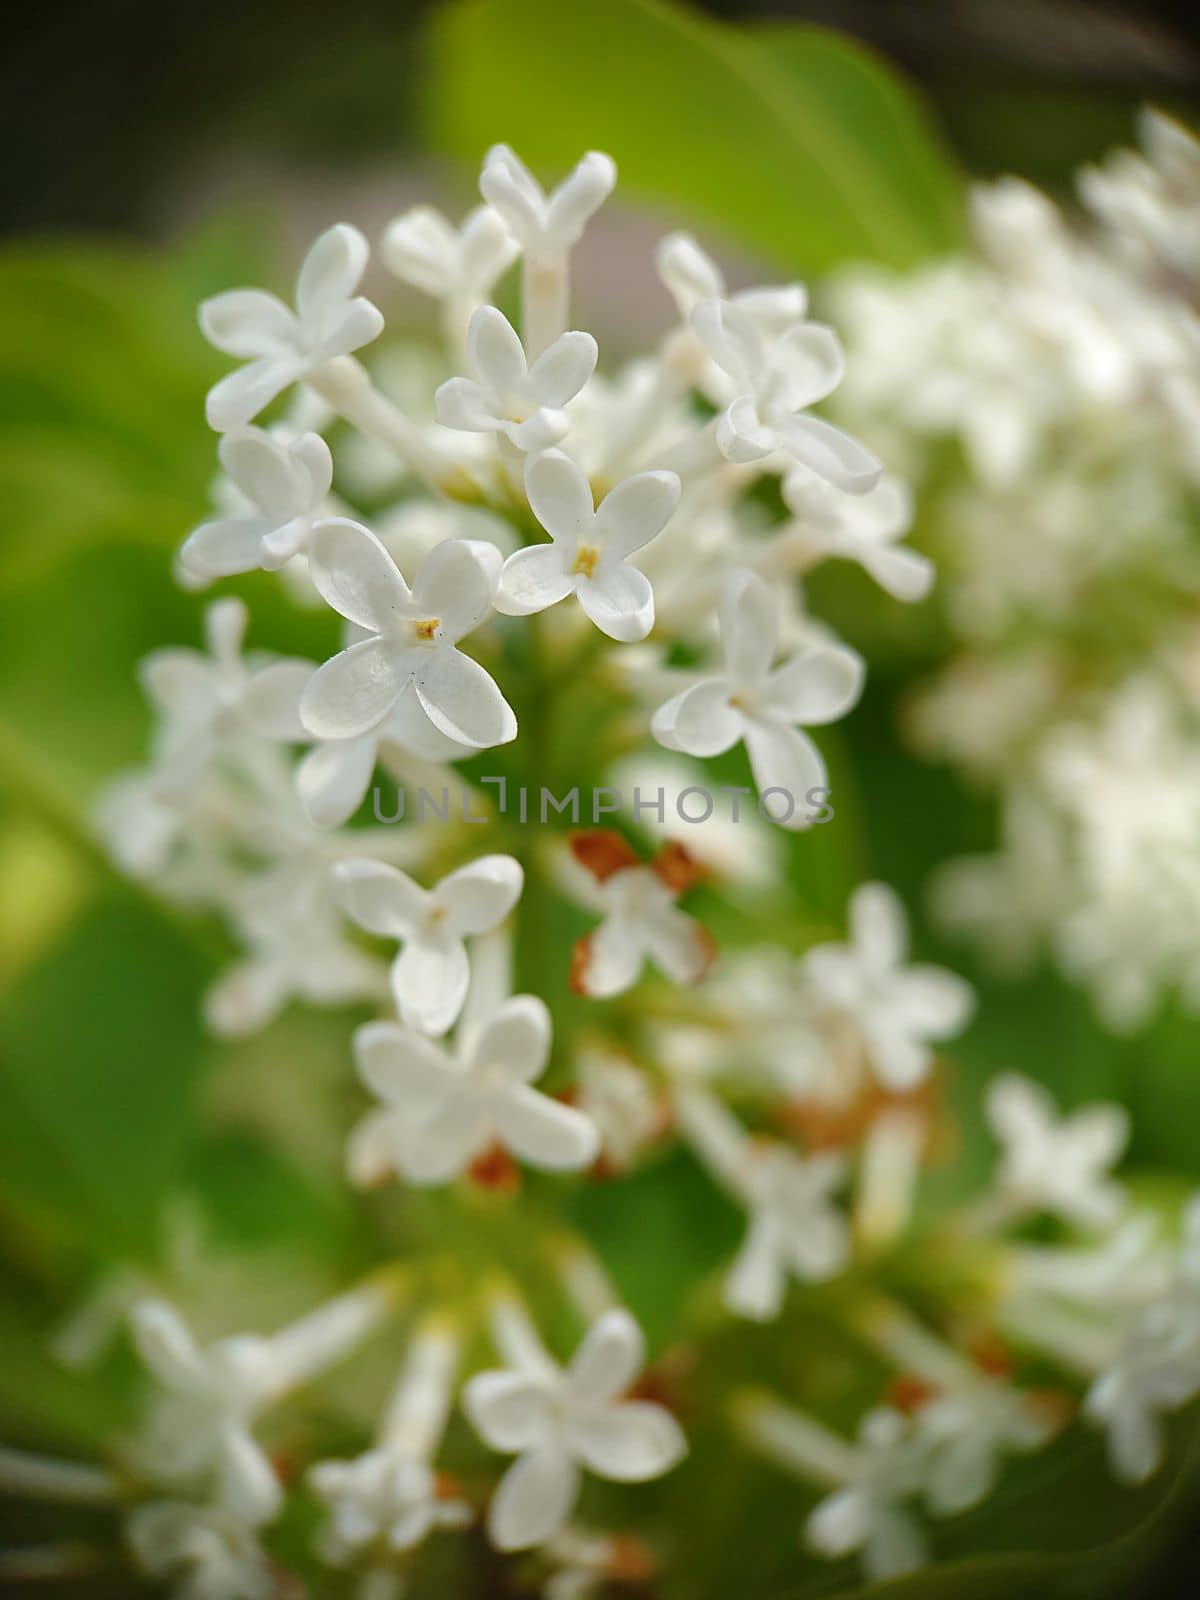 Background image of lilac with small white flowers outdoors. .Macrophotography.Texture or background.